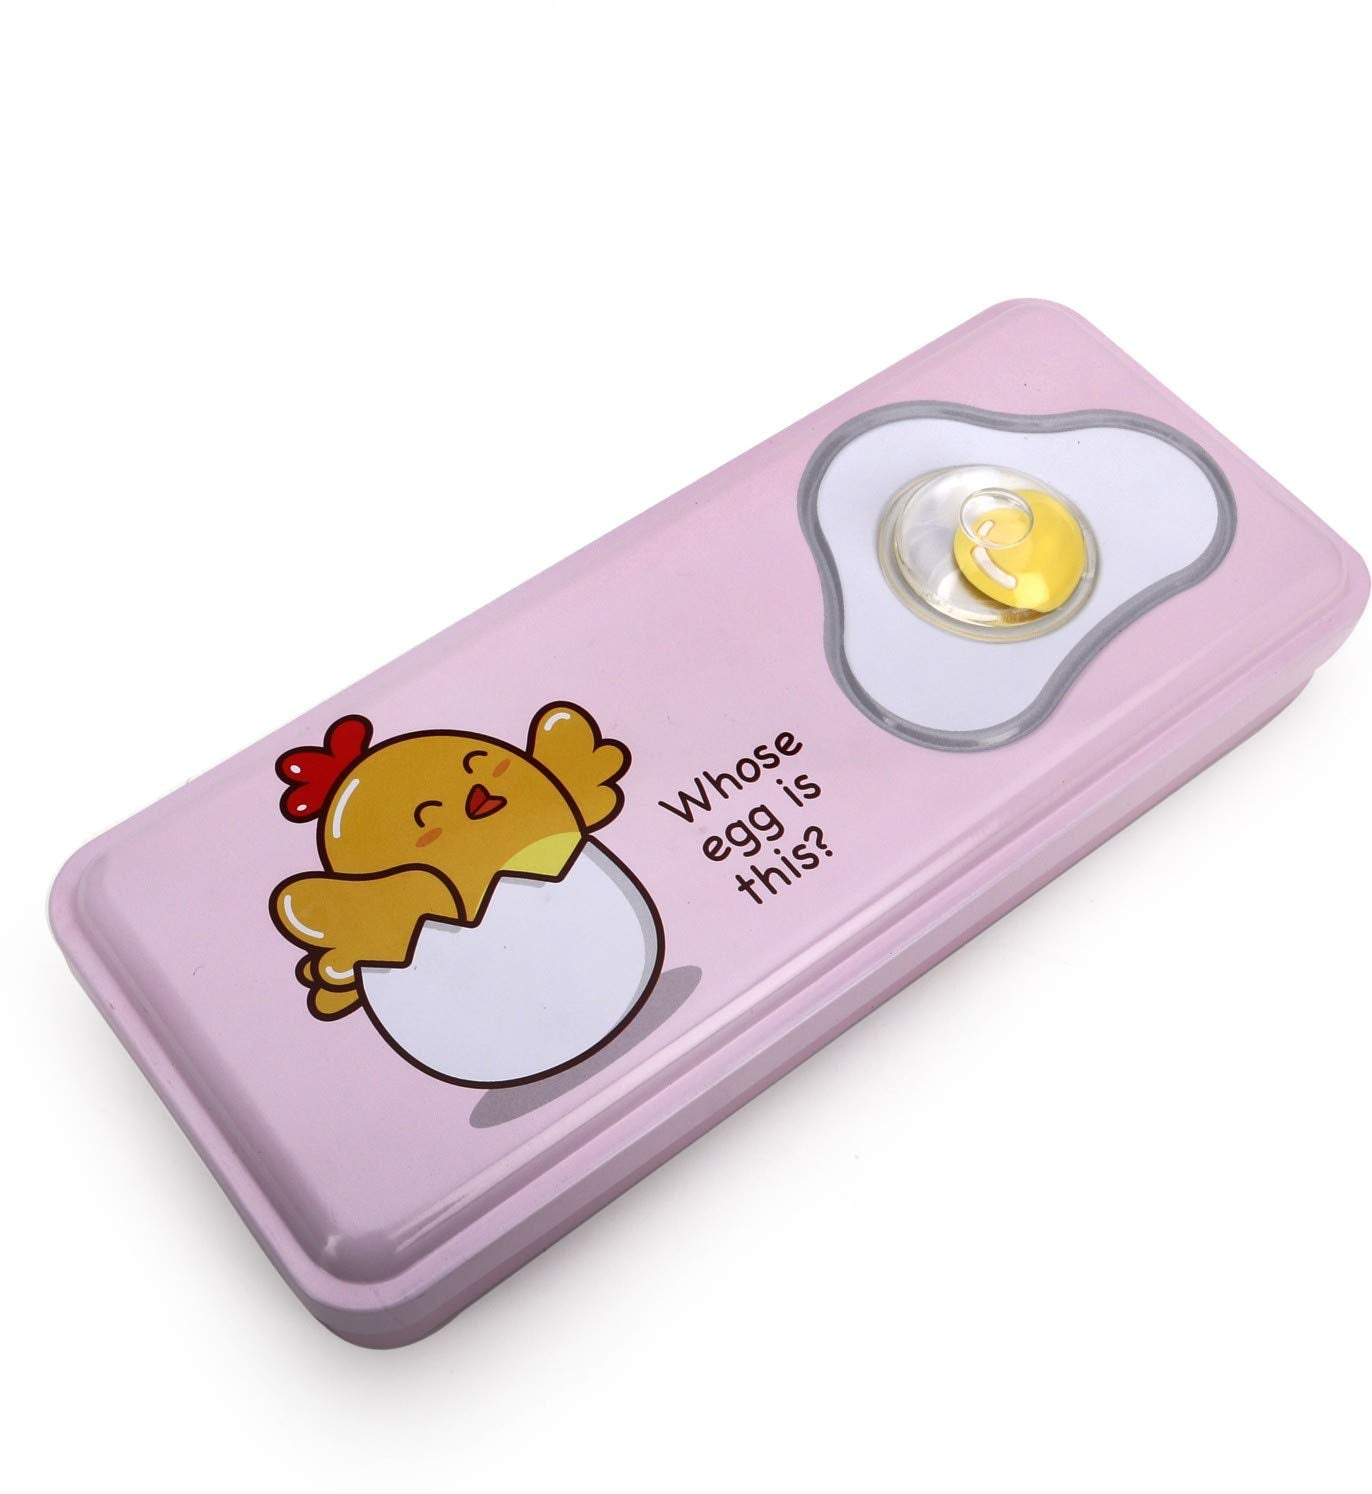 Multi-Layer Metal Pencil Box with 3D Egg Accessory on The Flap